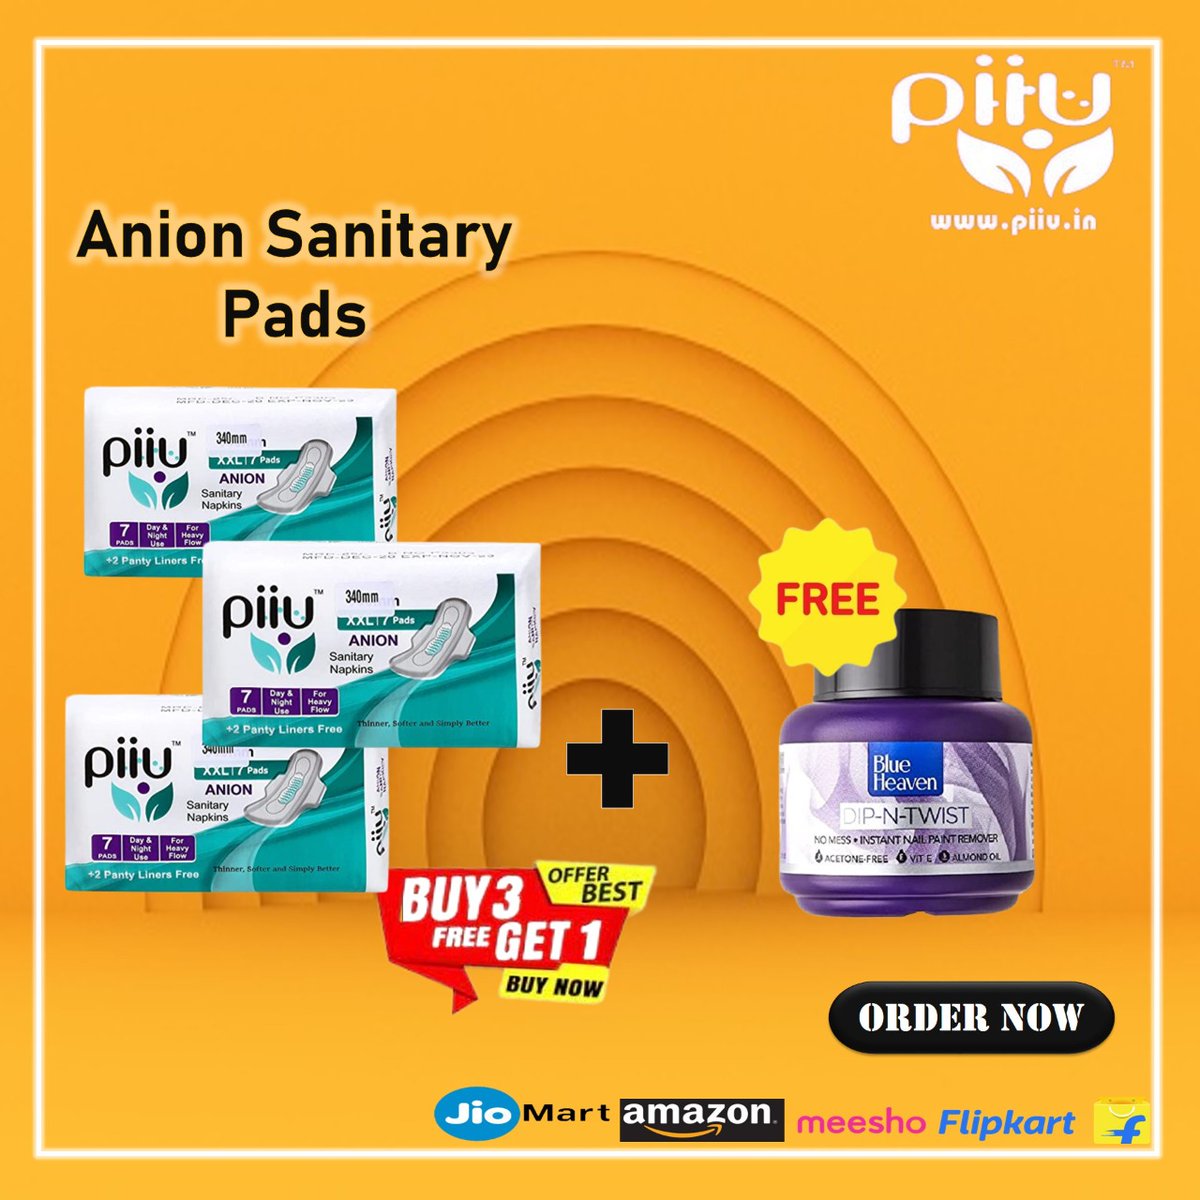 Piiu Anion Sanitary Pads
XXL 340mm
Pack of 7pads + 2 panty liners free
MRP Rs.95
Special Offer
Buy 3 packs and Get 1 BlueHeaven Dip N Twist Nail Paint Remover Free
Available online on Amazon, Meesho, Glowroad, etc.
Connect on WhatsApp: +91-9971227347
#piiu #anionpads #sanitarypad